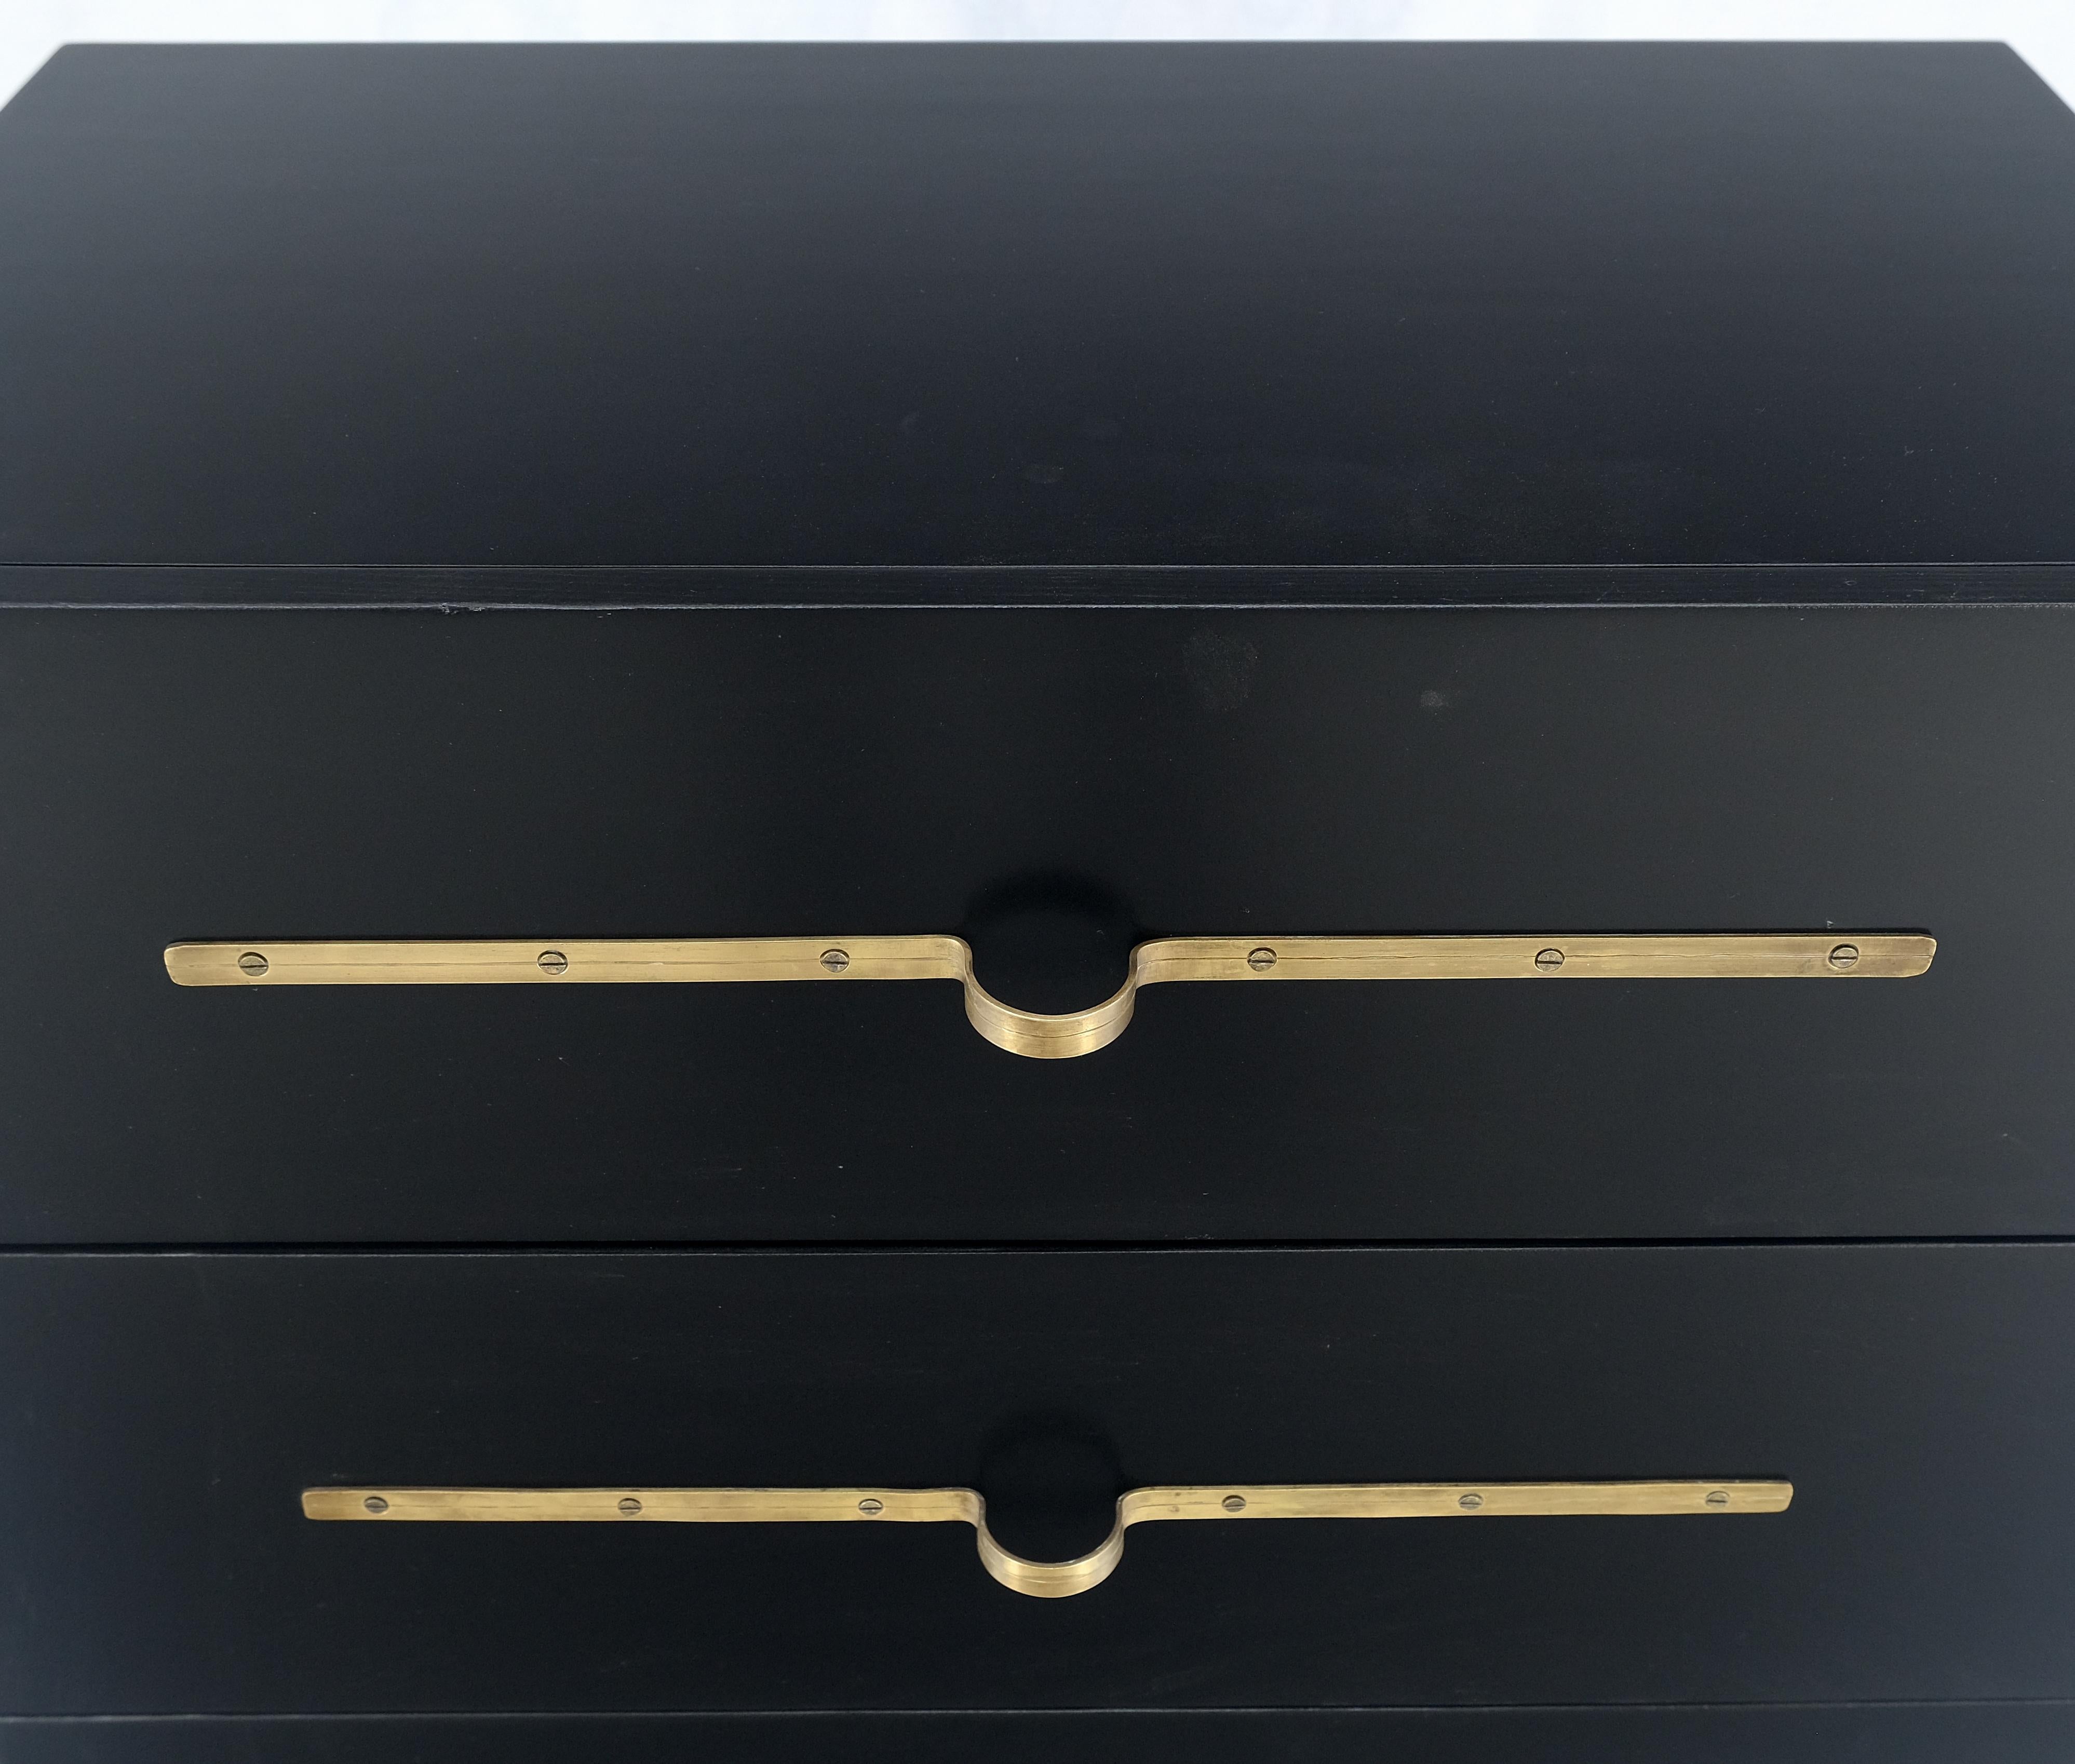 Black Lacquer Solid Brass Decorative Hardware Cone Shape Brass Legs 3 Drawers Bachelor Chest Dresser Restored MINT!